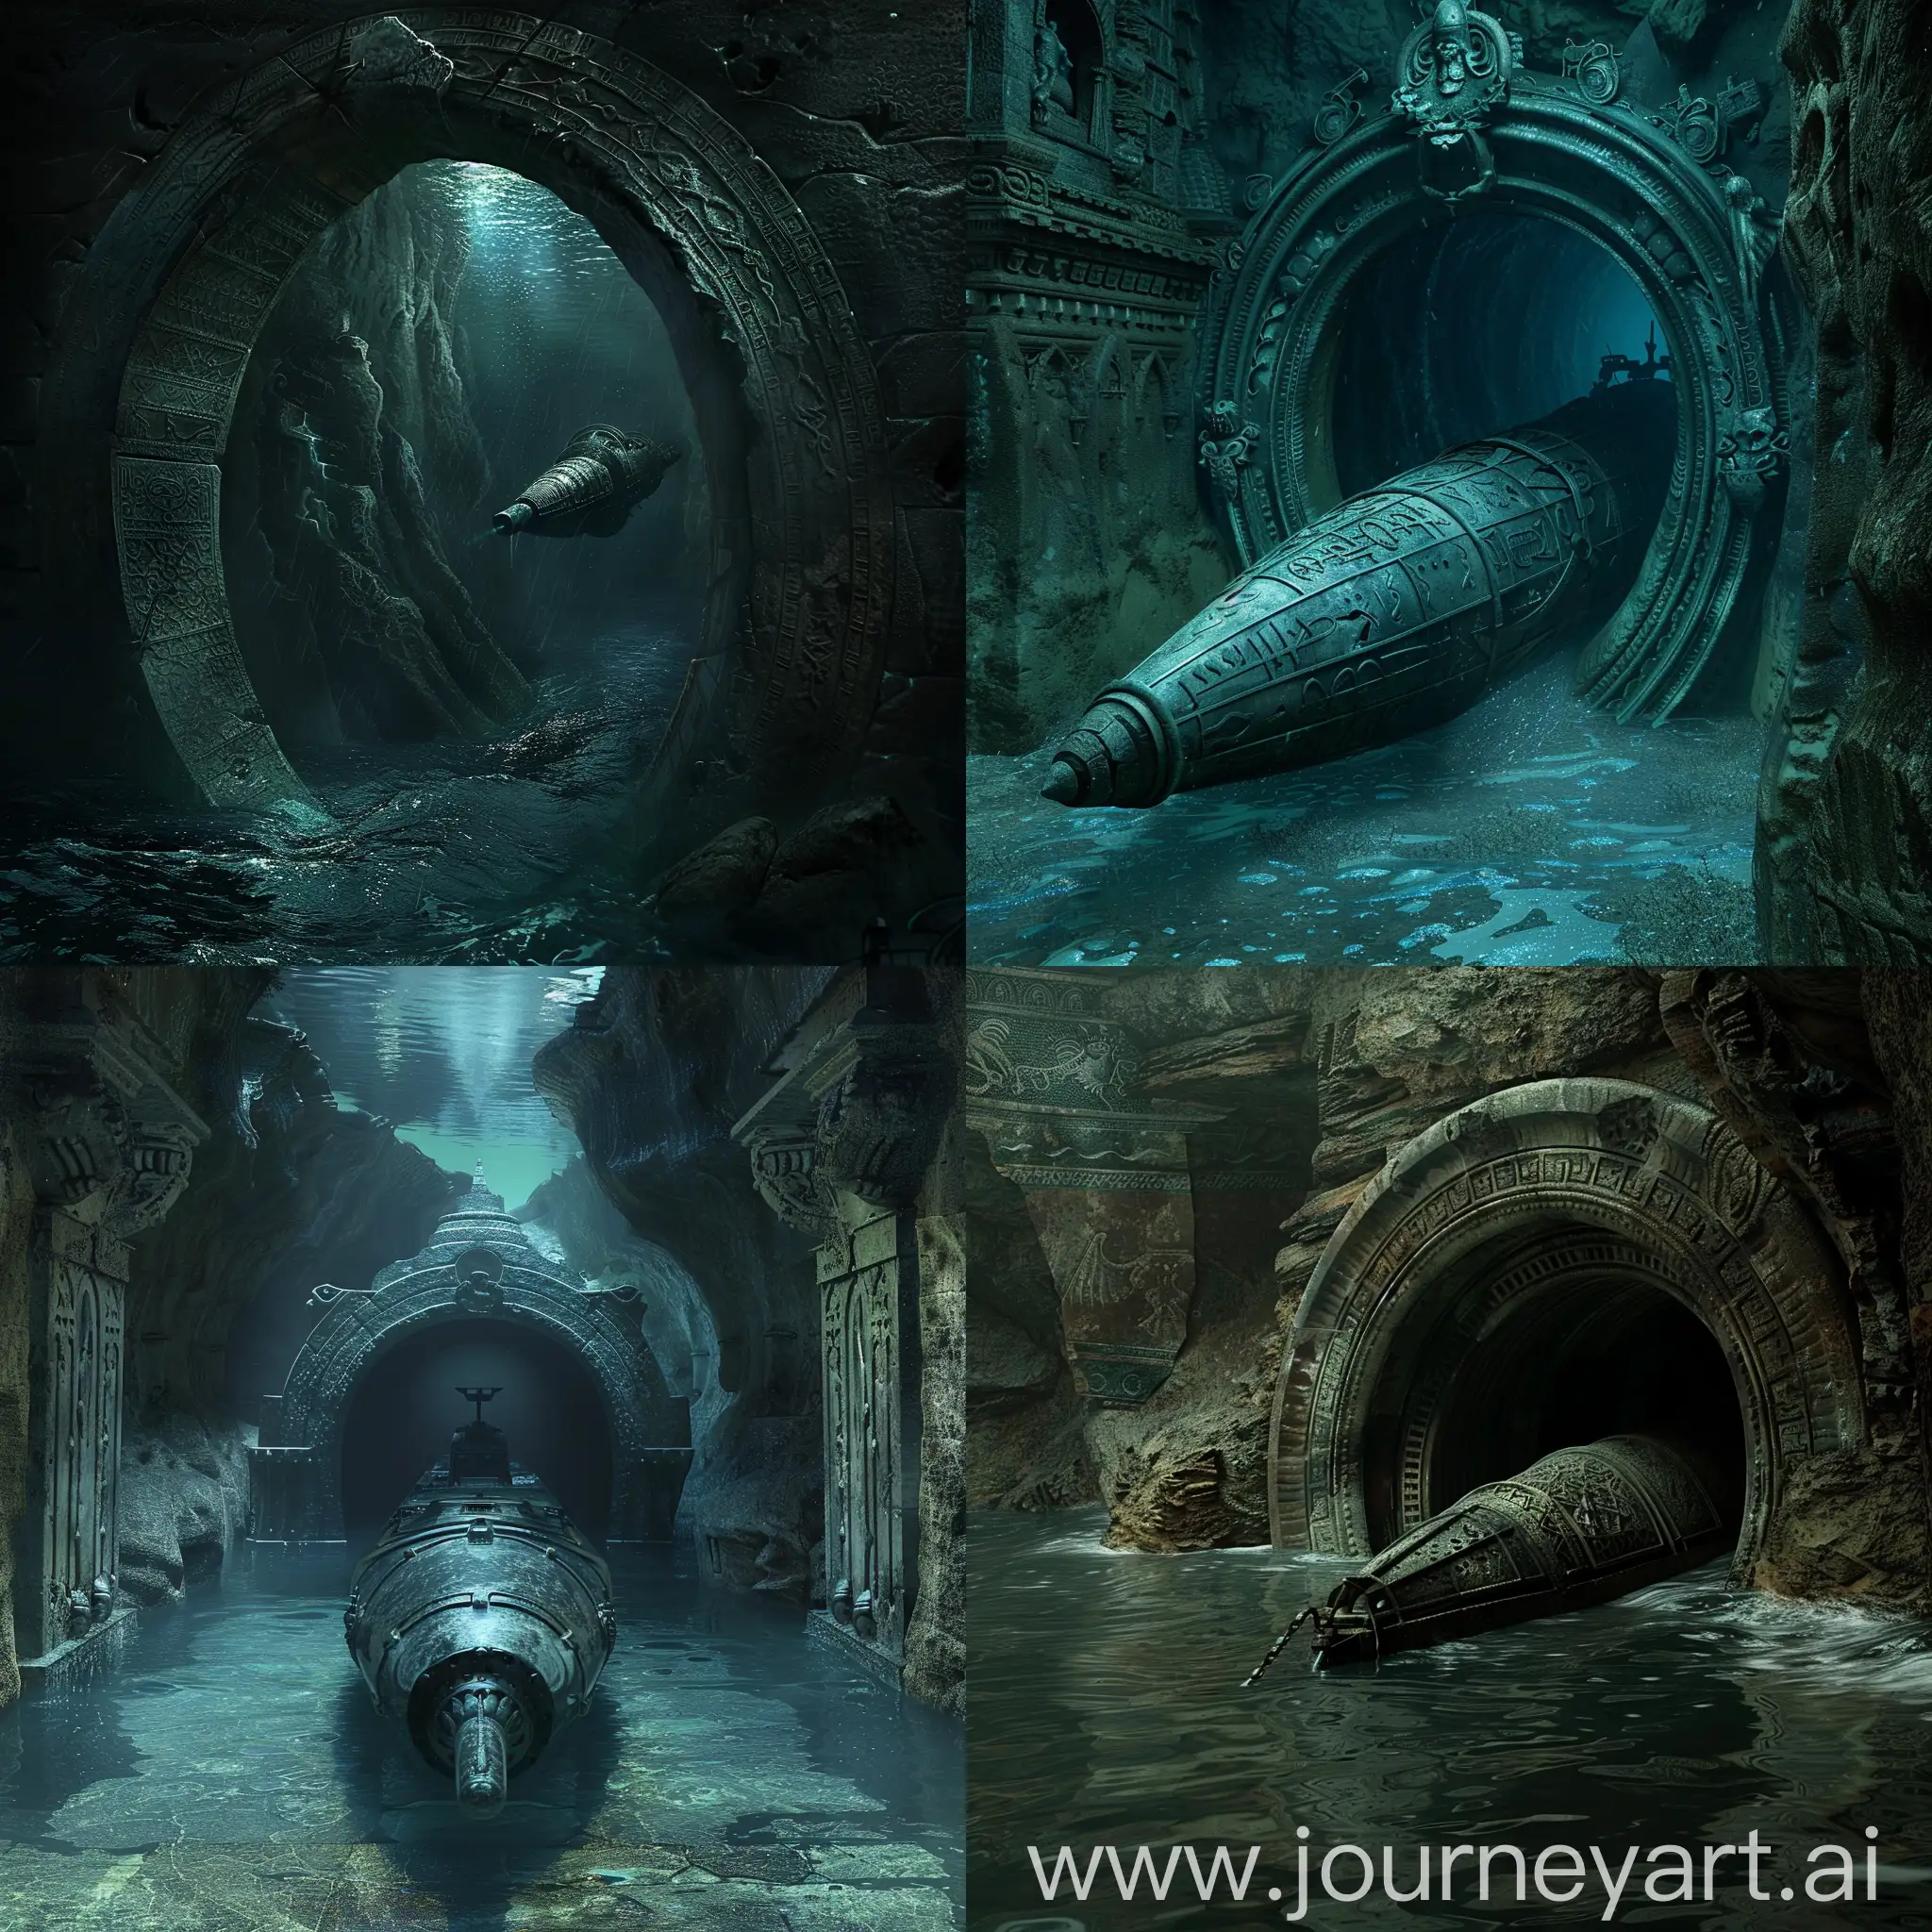 a medieval prototype of a bathyscaphe swam into a carved stone tunnel, the depths of the ocean, total darkness, fantasy, bioshock, night